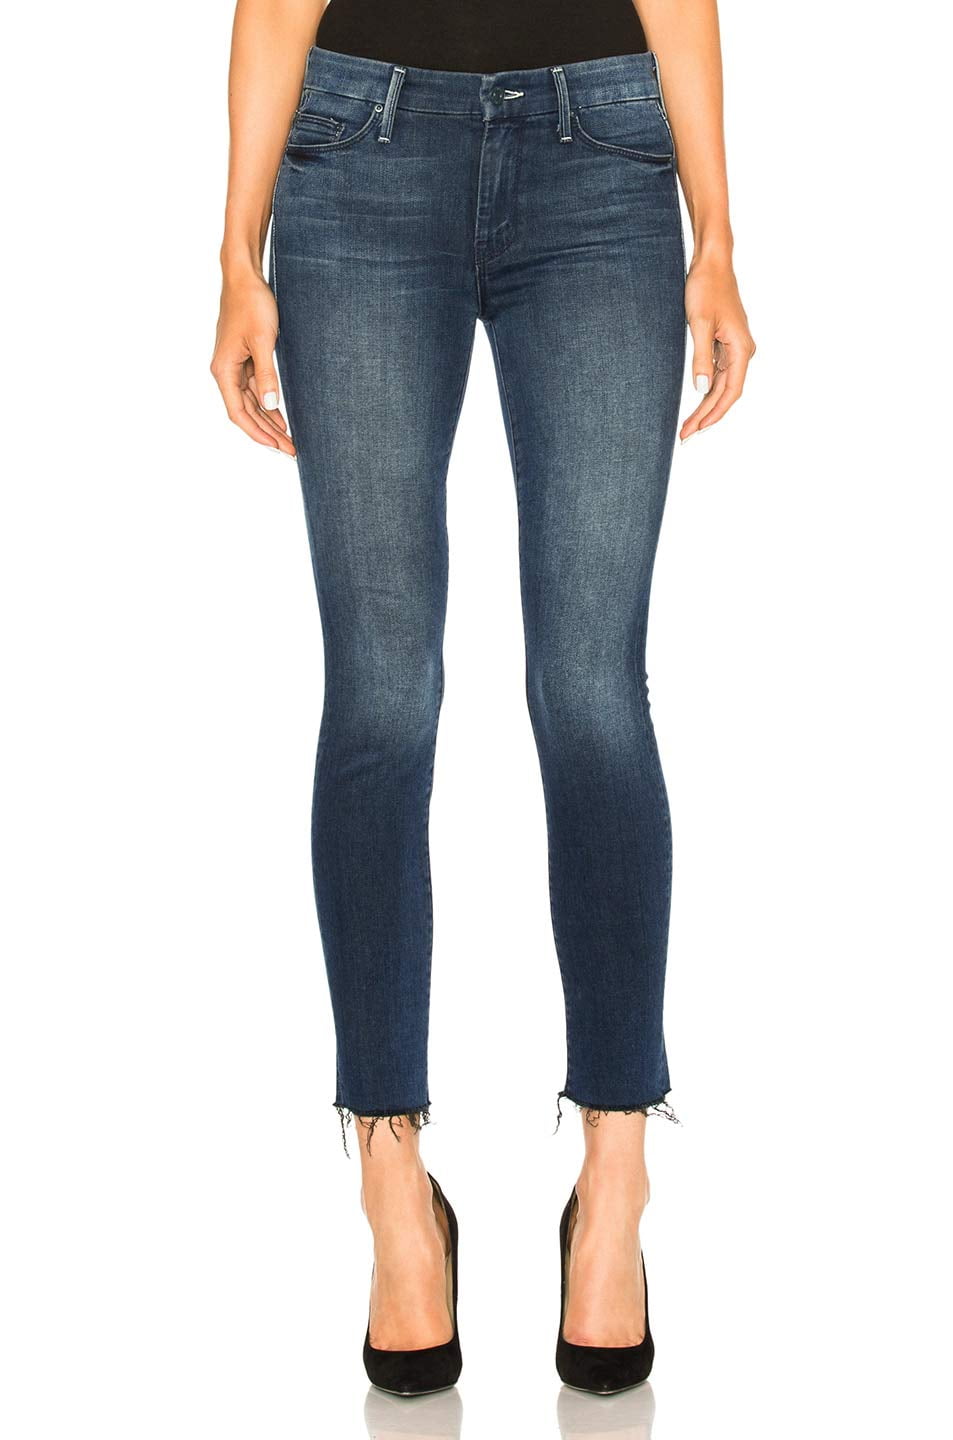 MOTHER Looker Ankle Fray Skinny Jeans Repeating Love - Walmart.com